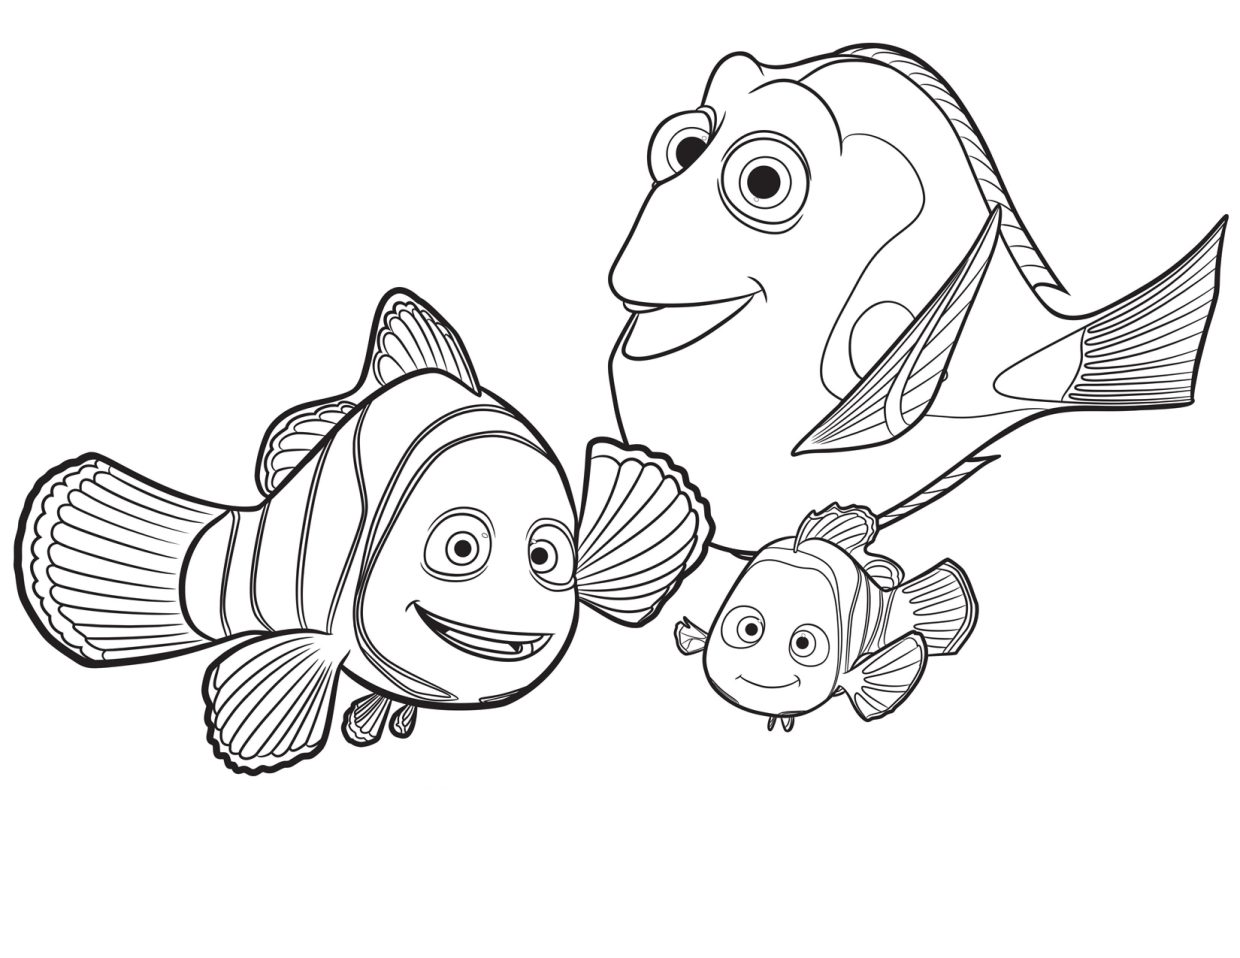 Printable finding nemo coloring pages for kids